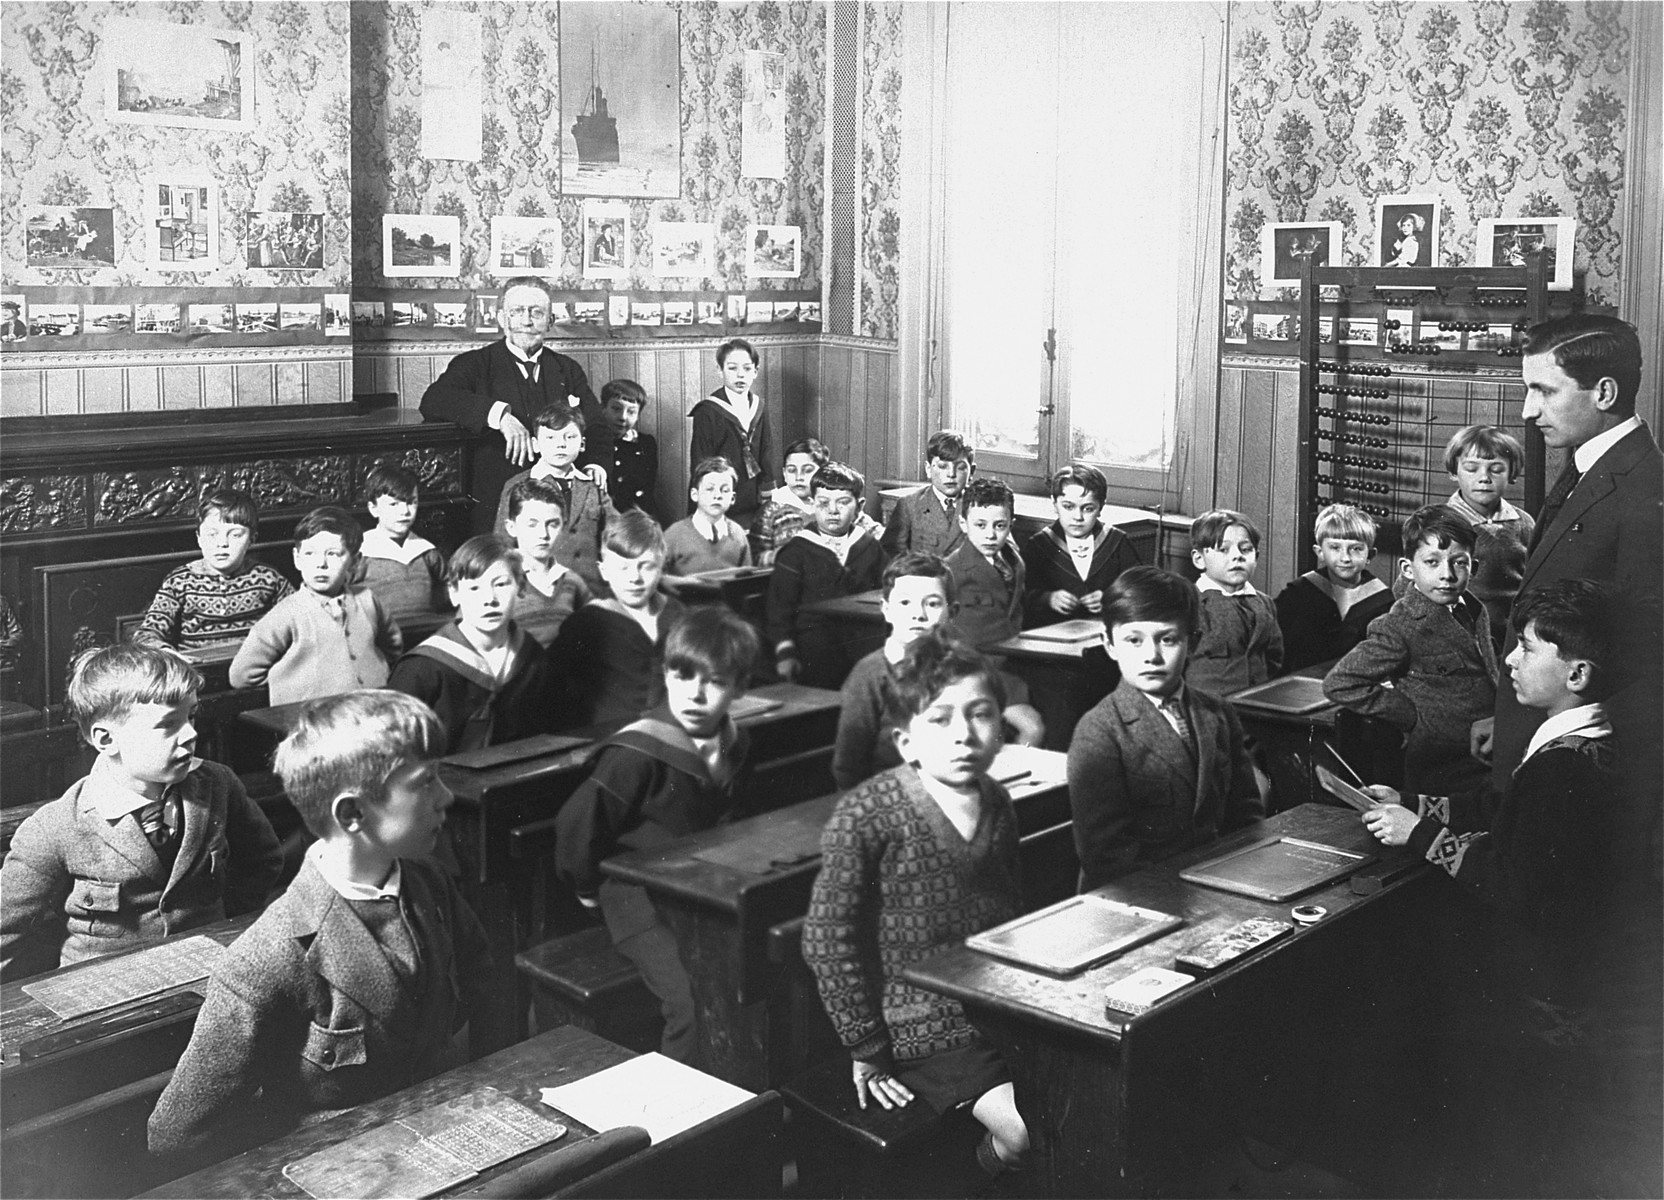 A young boy recites his lessons in a classroom in Antwerp, Belgium.

Among those pictured is Willem Friedman (seated in the middle row, second desk, left side).  Willem was born in 1919 in Holland, but from an early age lived in Belgium.